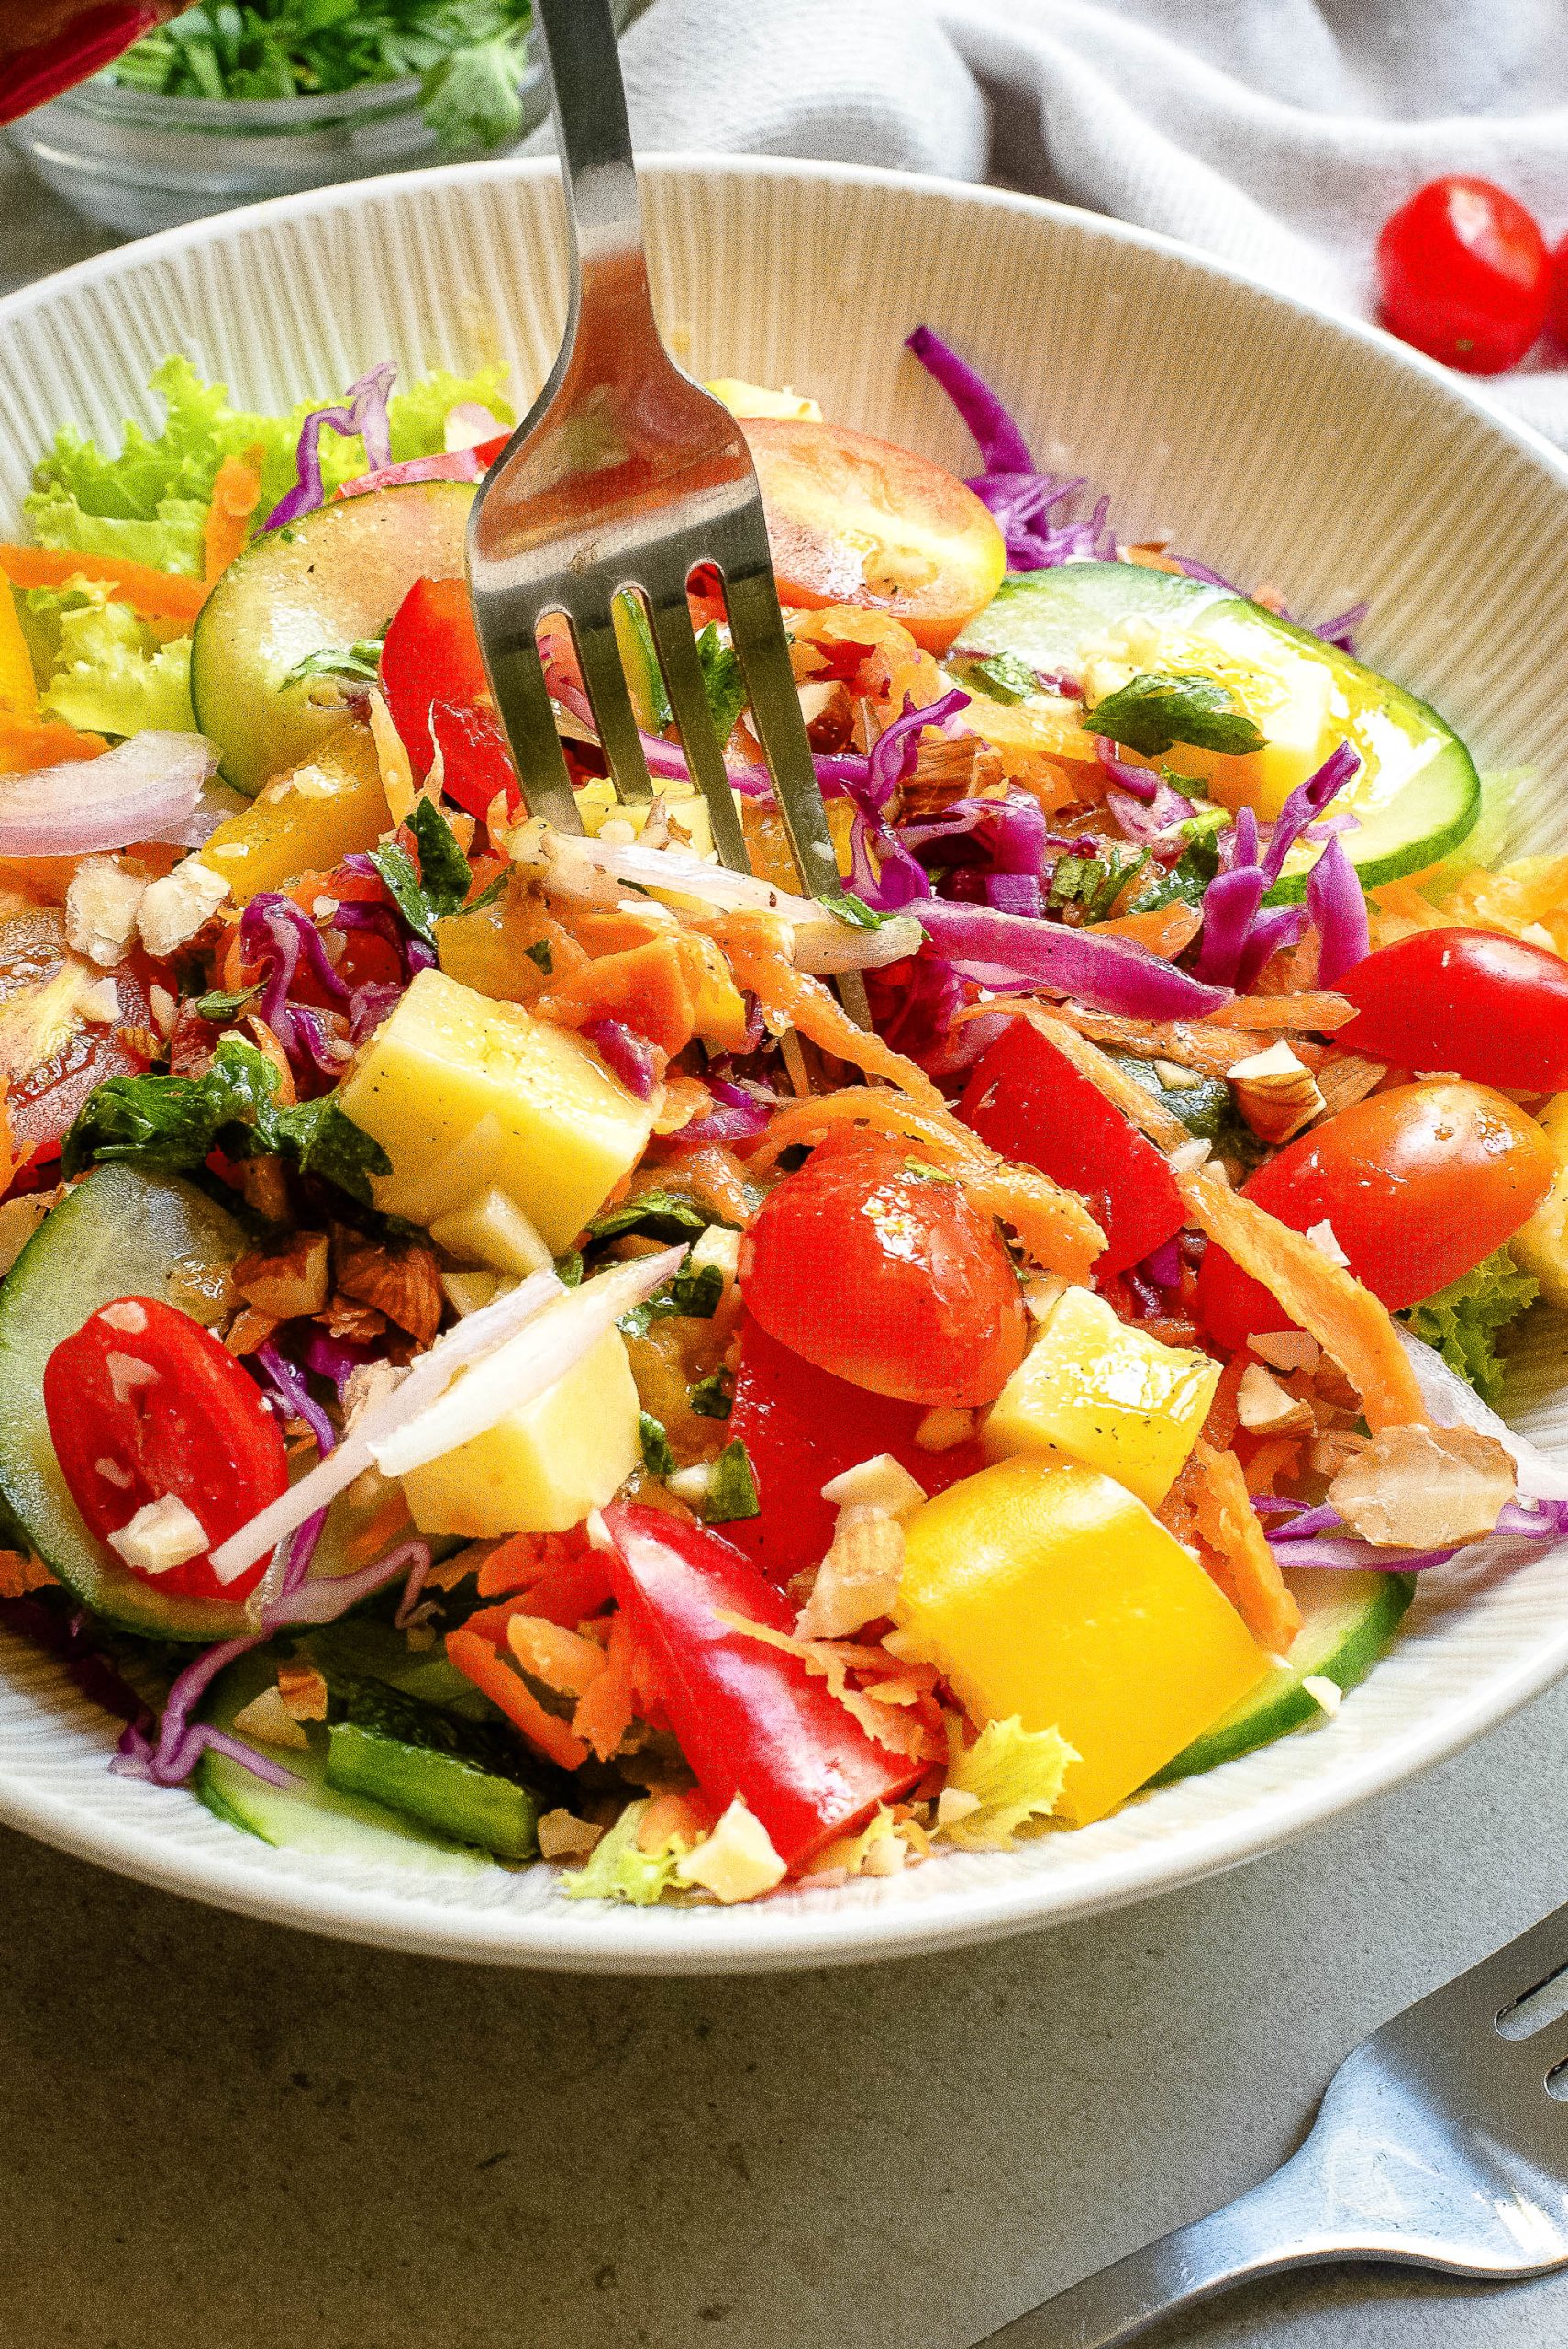 A colorful salad with cherry tomatoes, cucumber slices, red cabbage, yellow bell peppers, shredded carrots, and chopped nuts is being mixed with a fork in a white bowl.